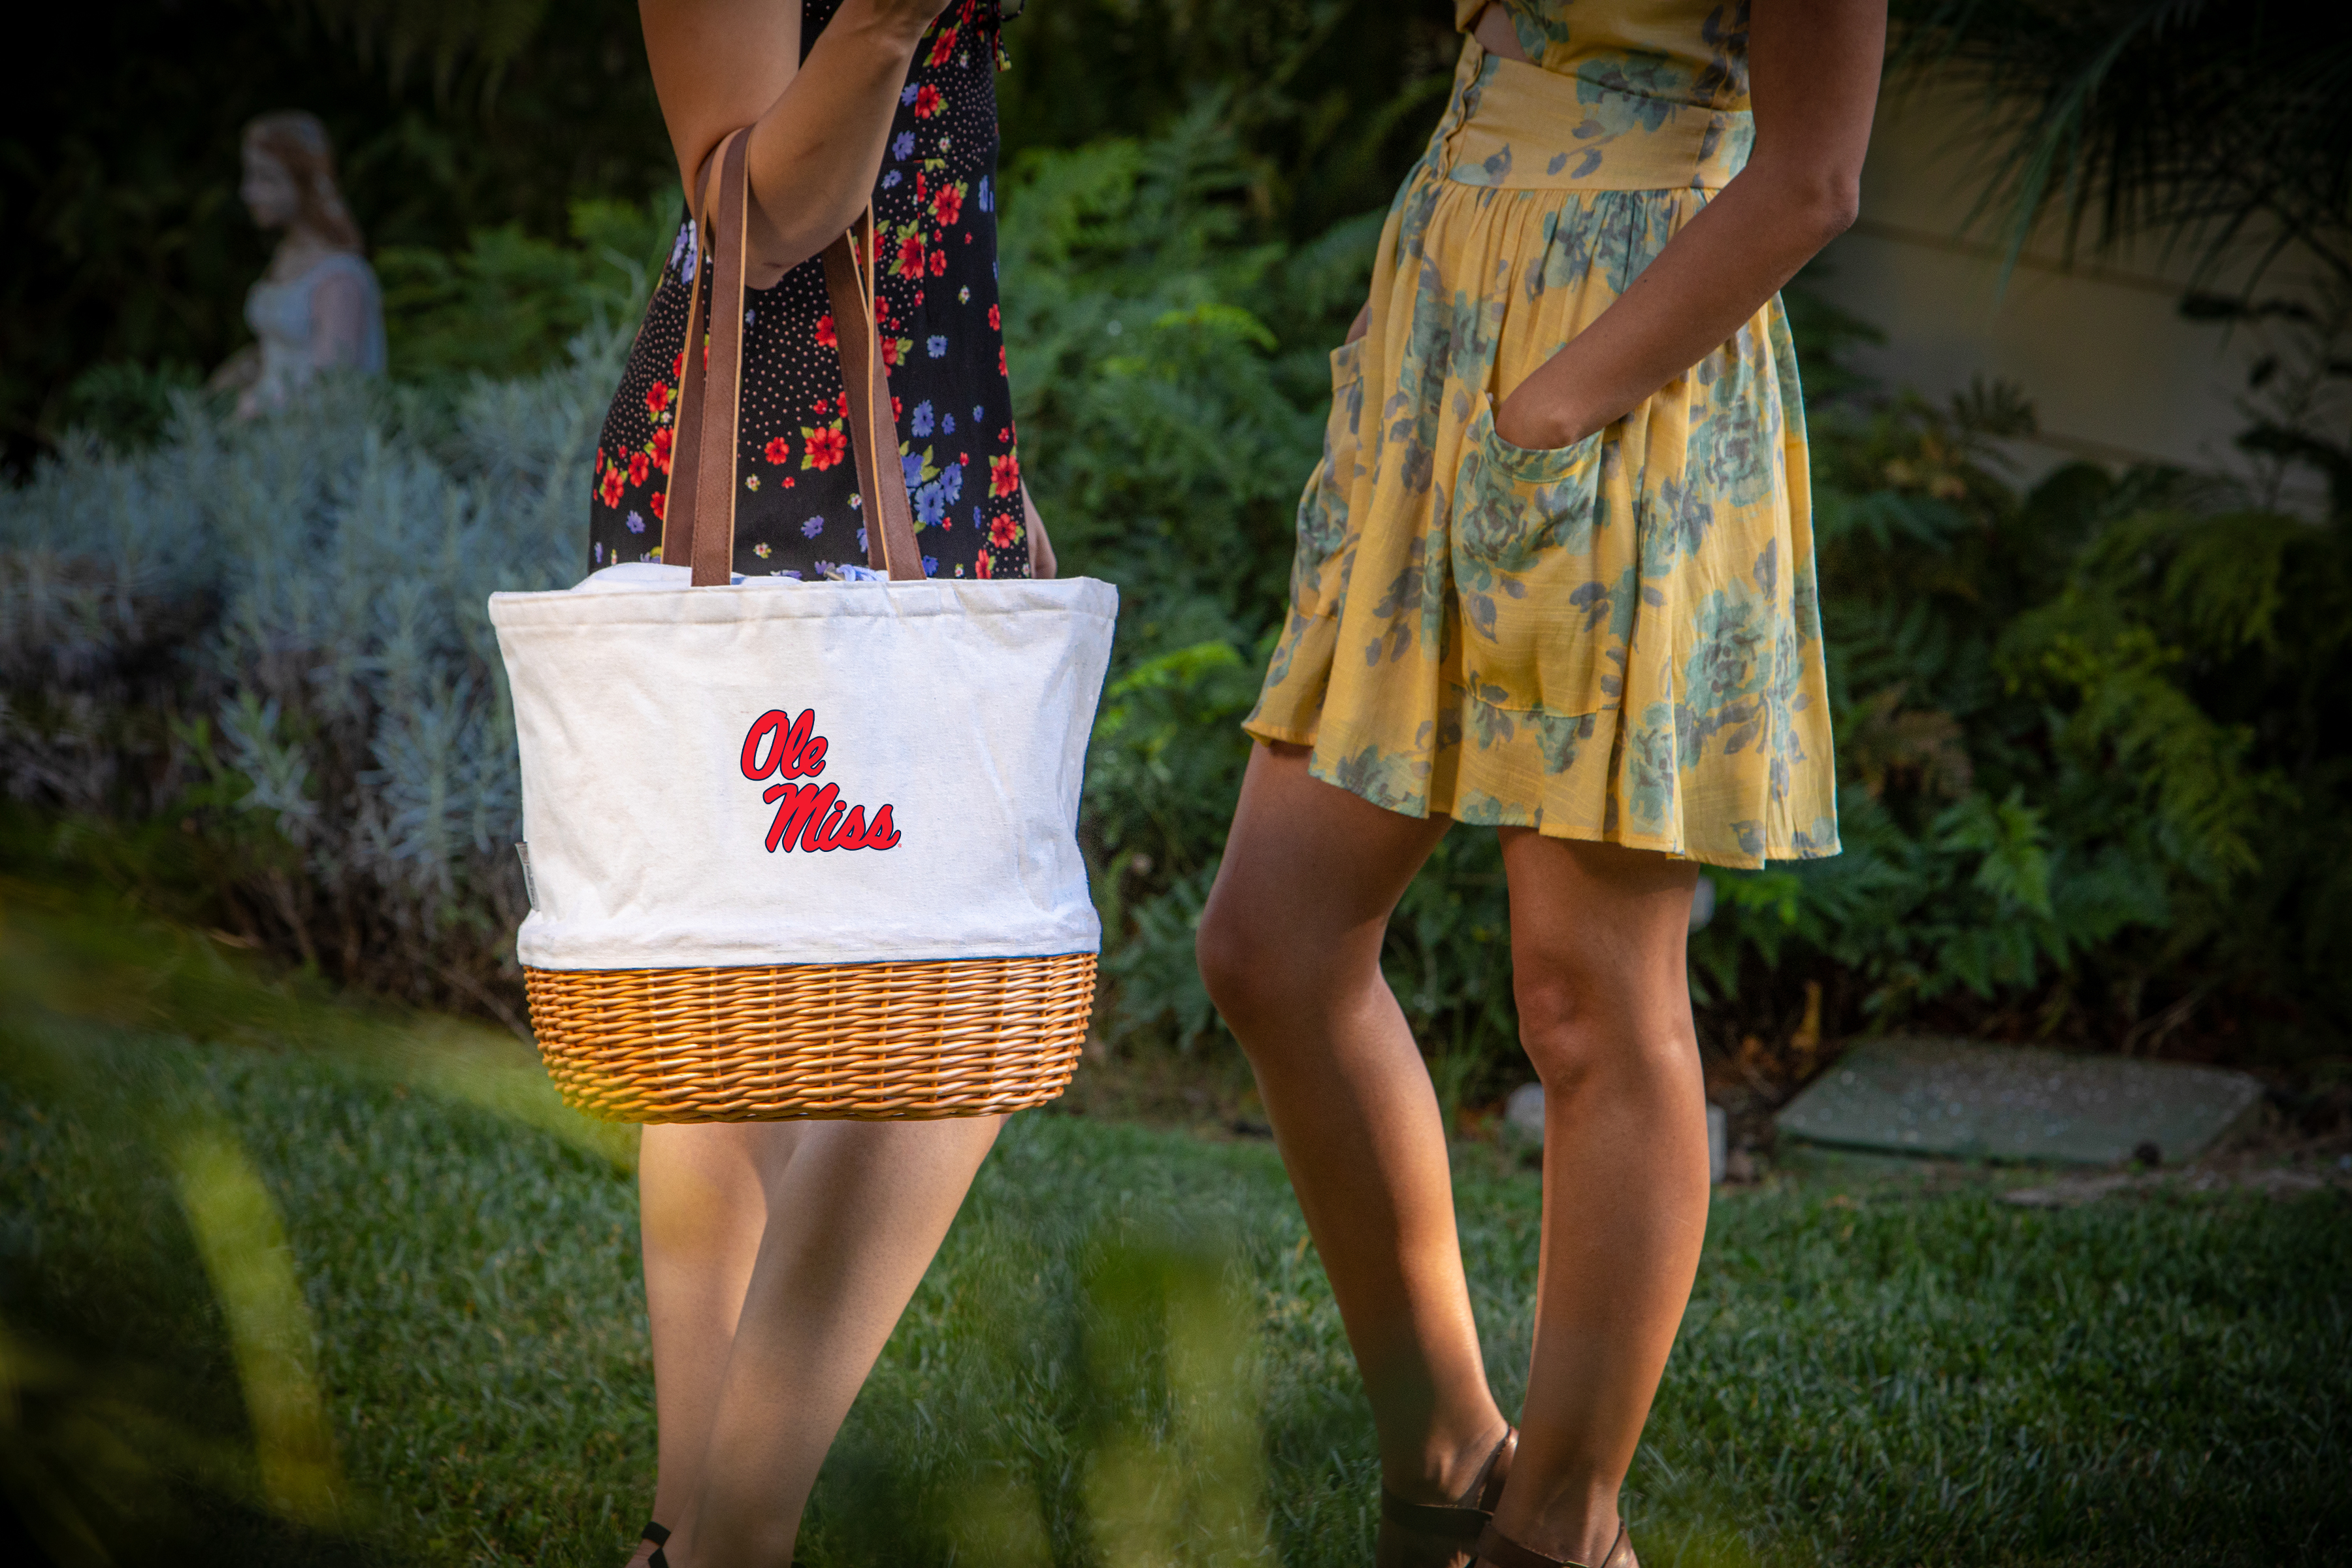 Ole Miss Rebels - Coronado Canvas and Willow Basket Tote